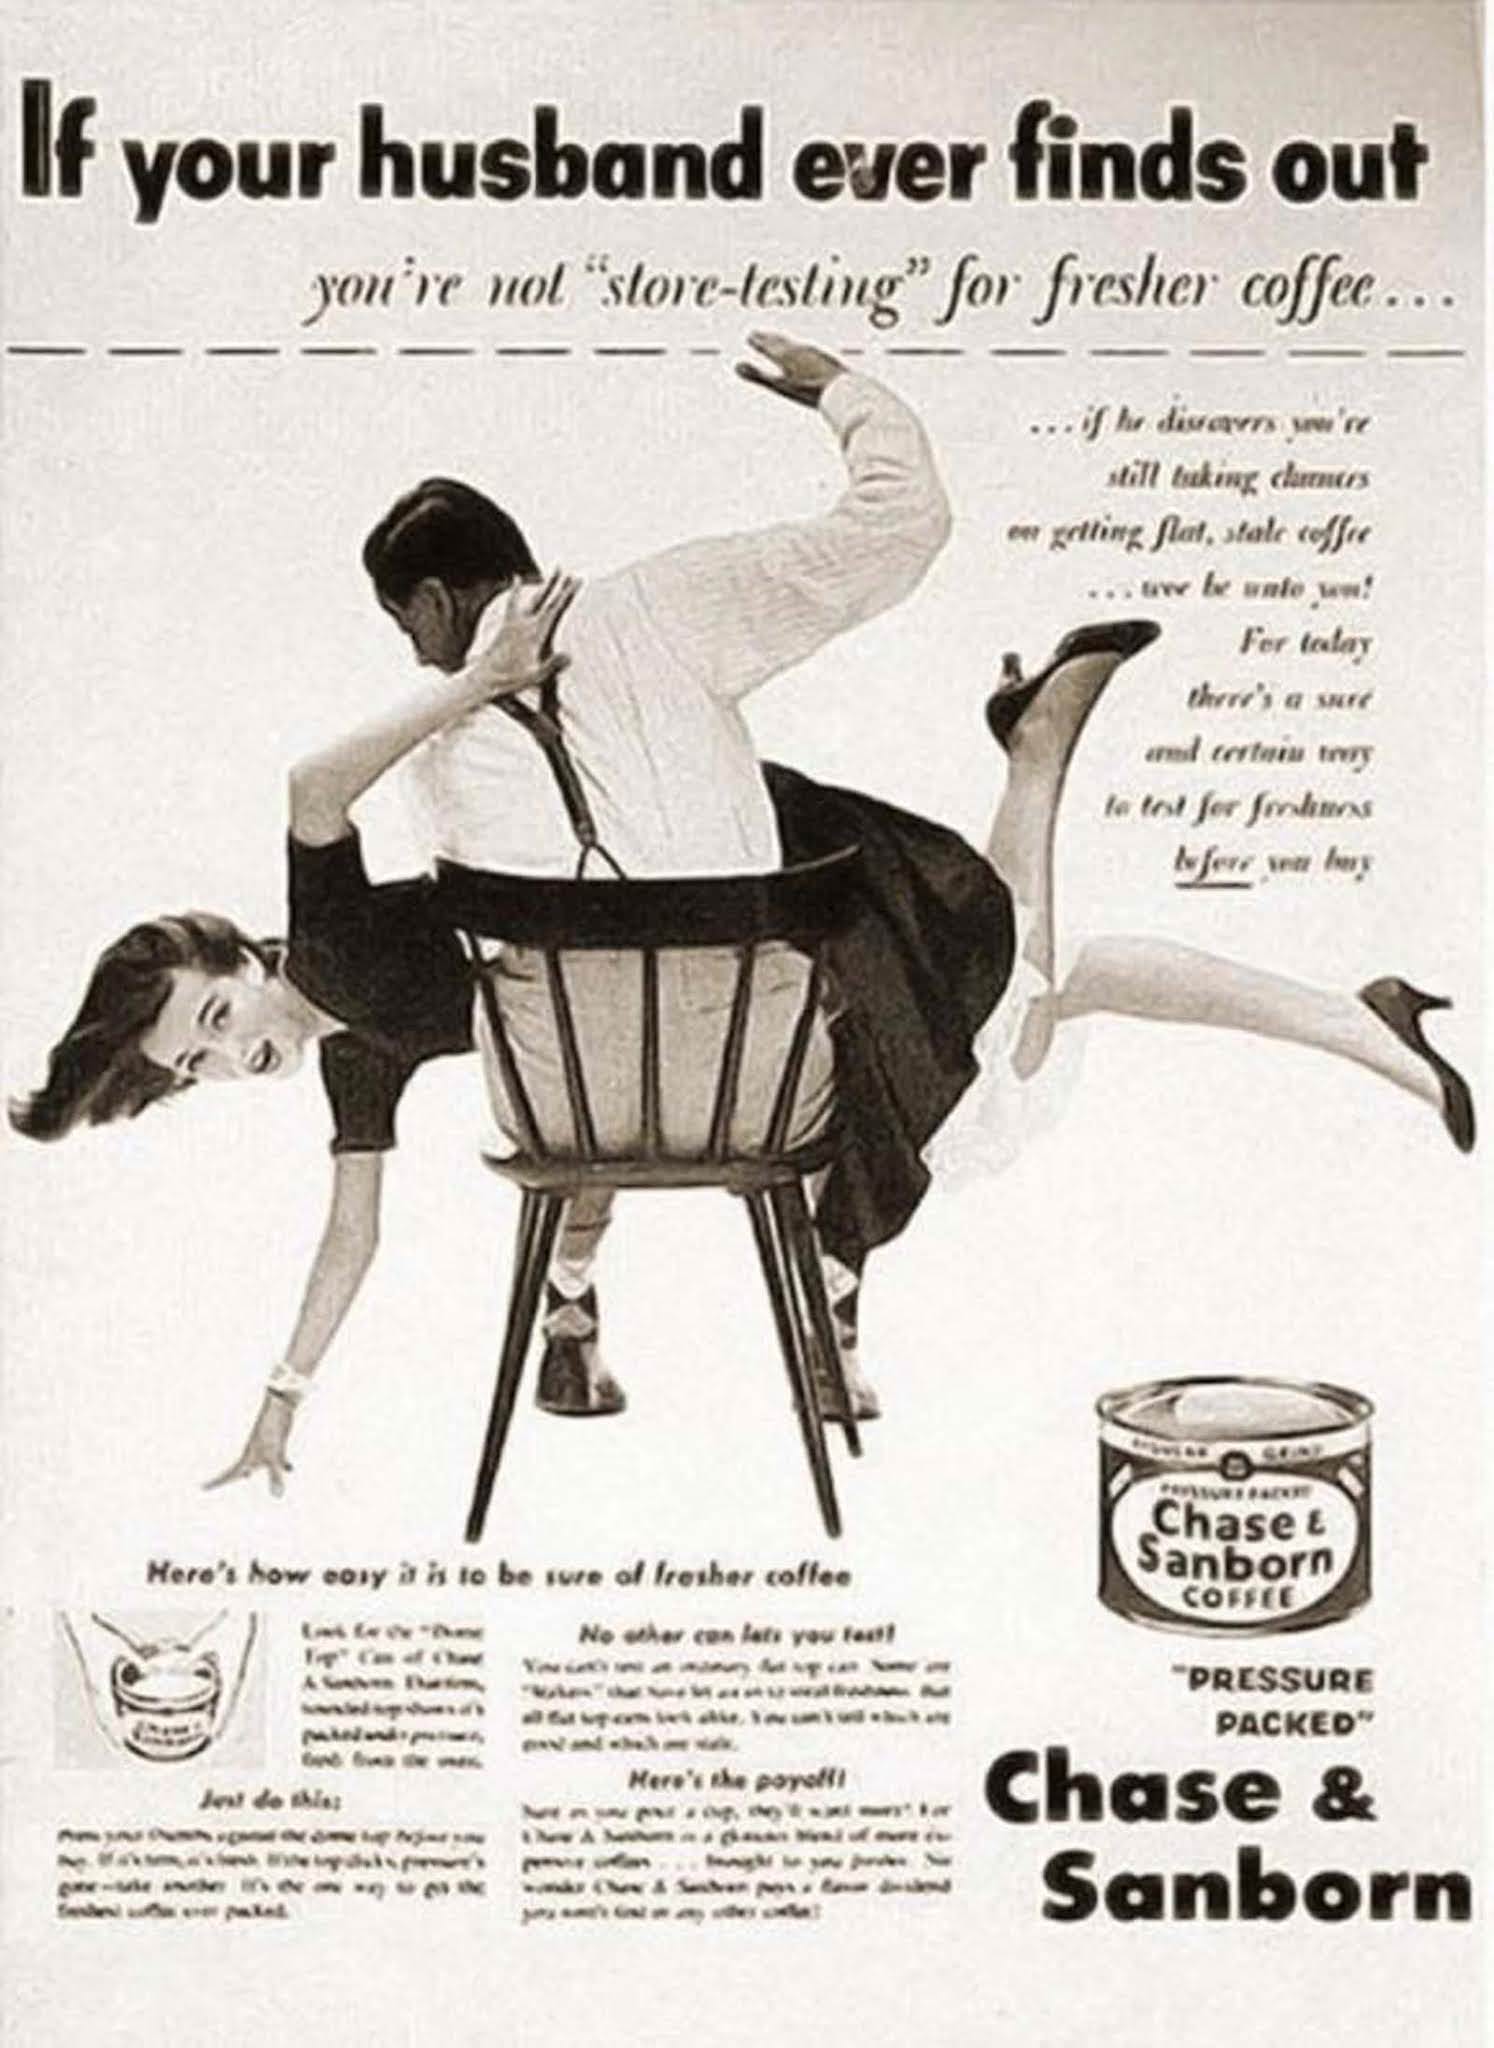 If your husband ever finds out you’re not ‘store-testing’ for fresher coffee…” starts this ad that ran in LIFE magazine back in August 1952.